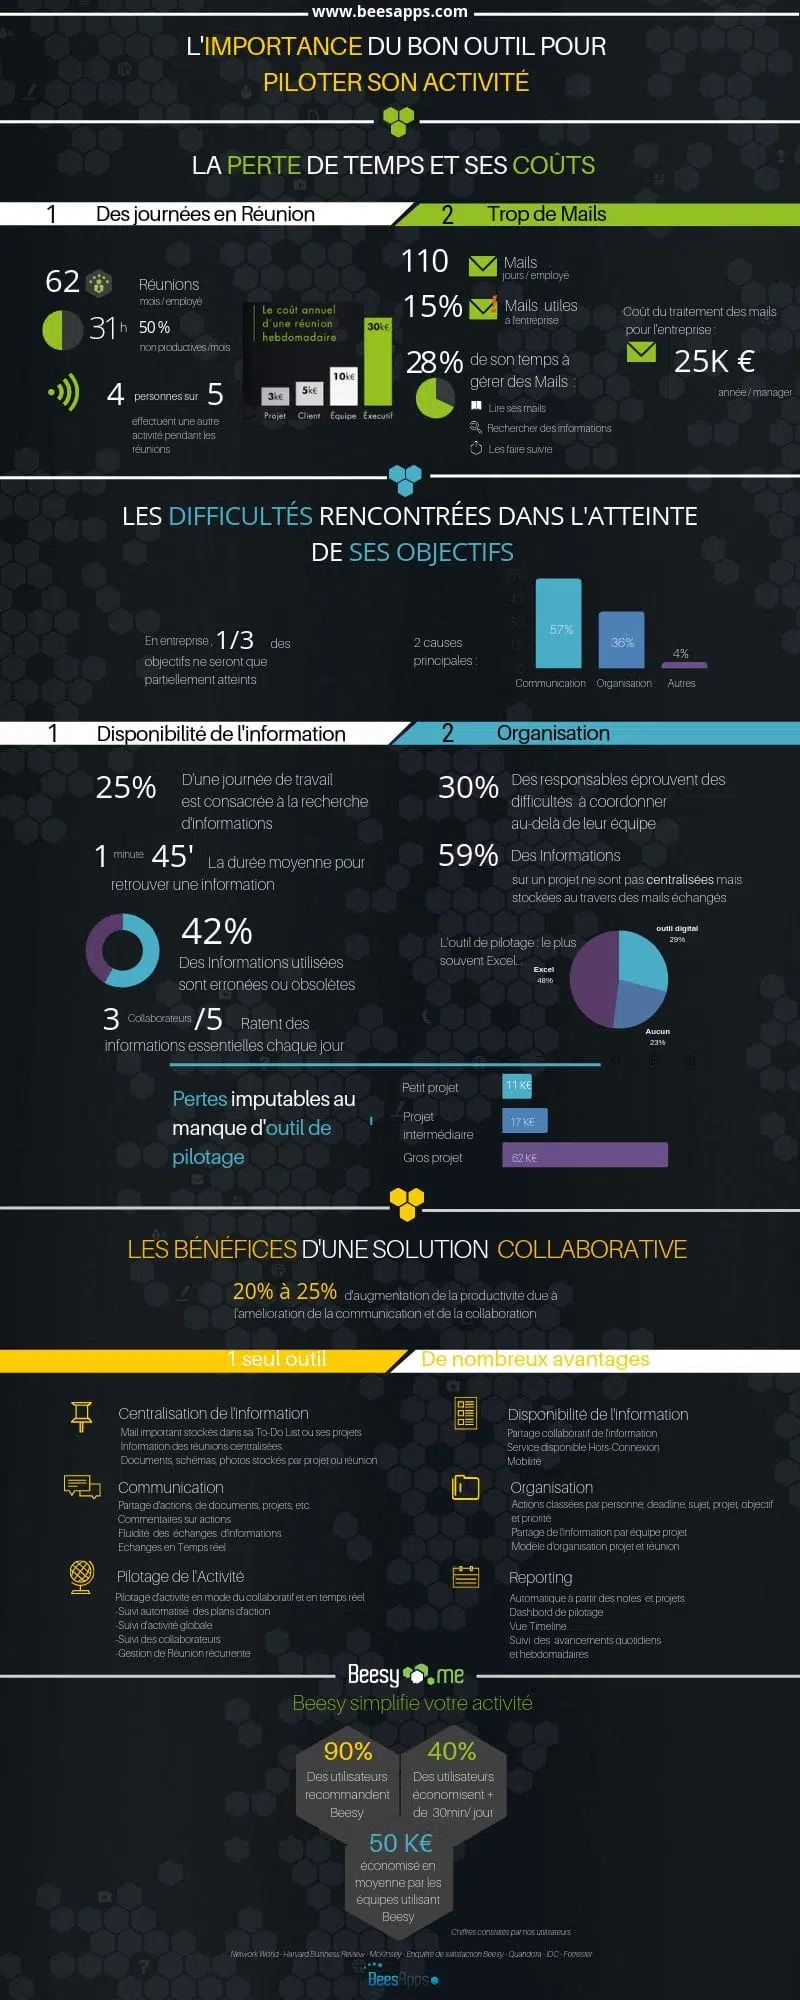 solution collaborative - infographie Beesy